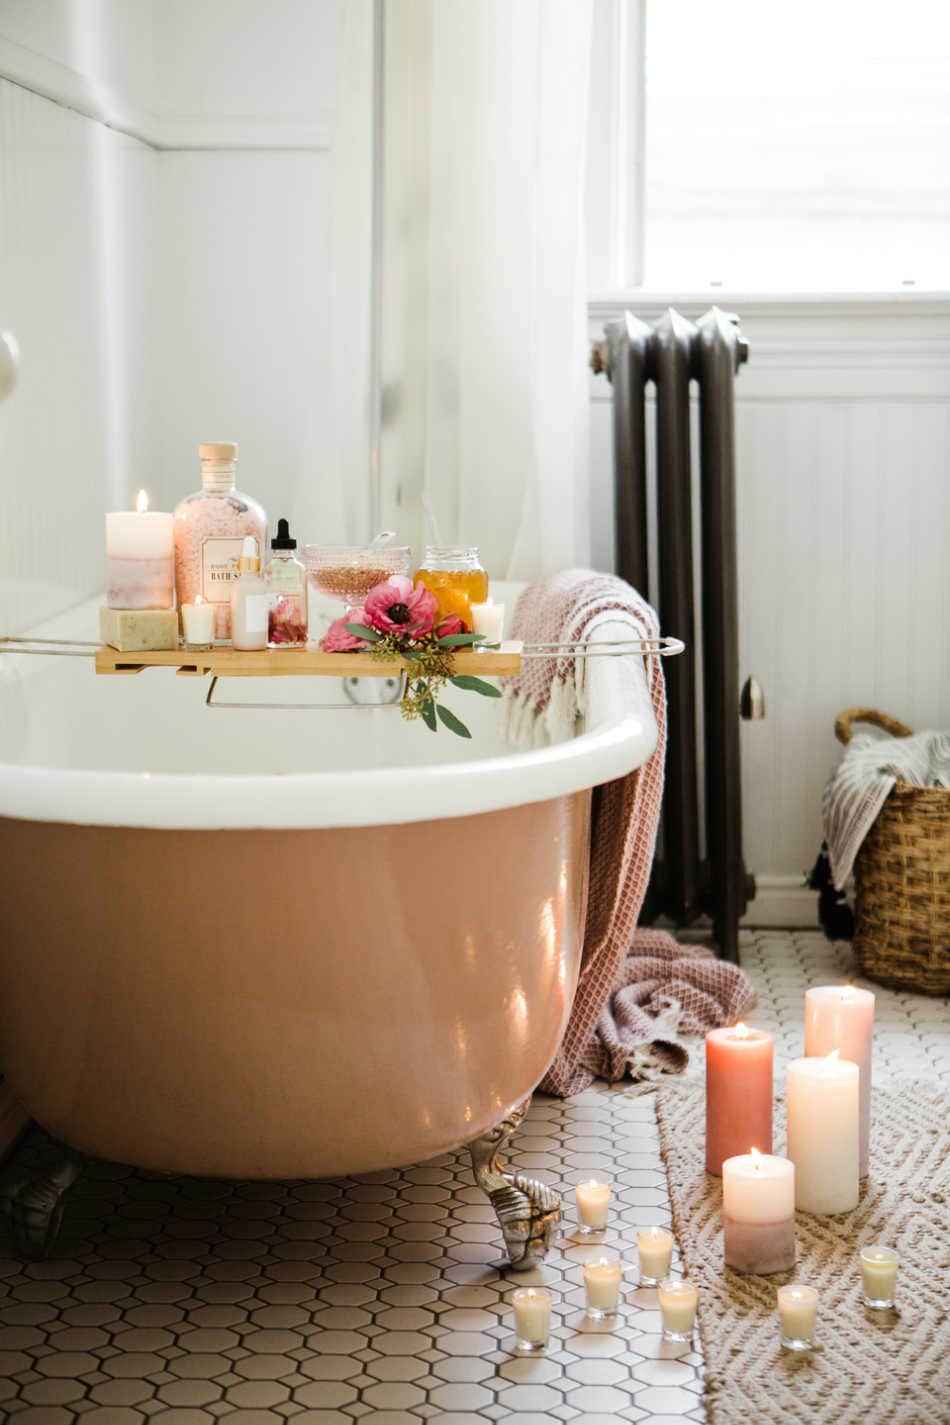 DIY Natural Bathtub Cleaner That's Easy (And Cheap!)